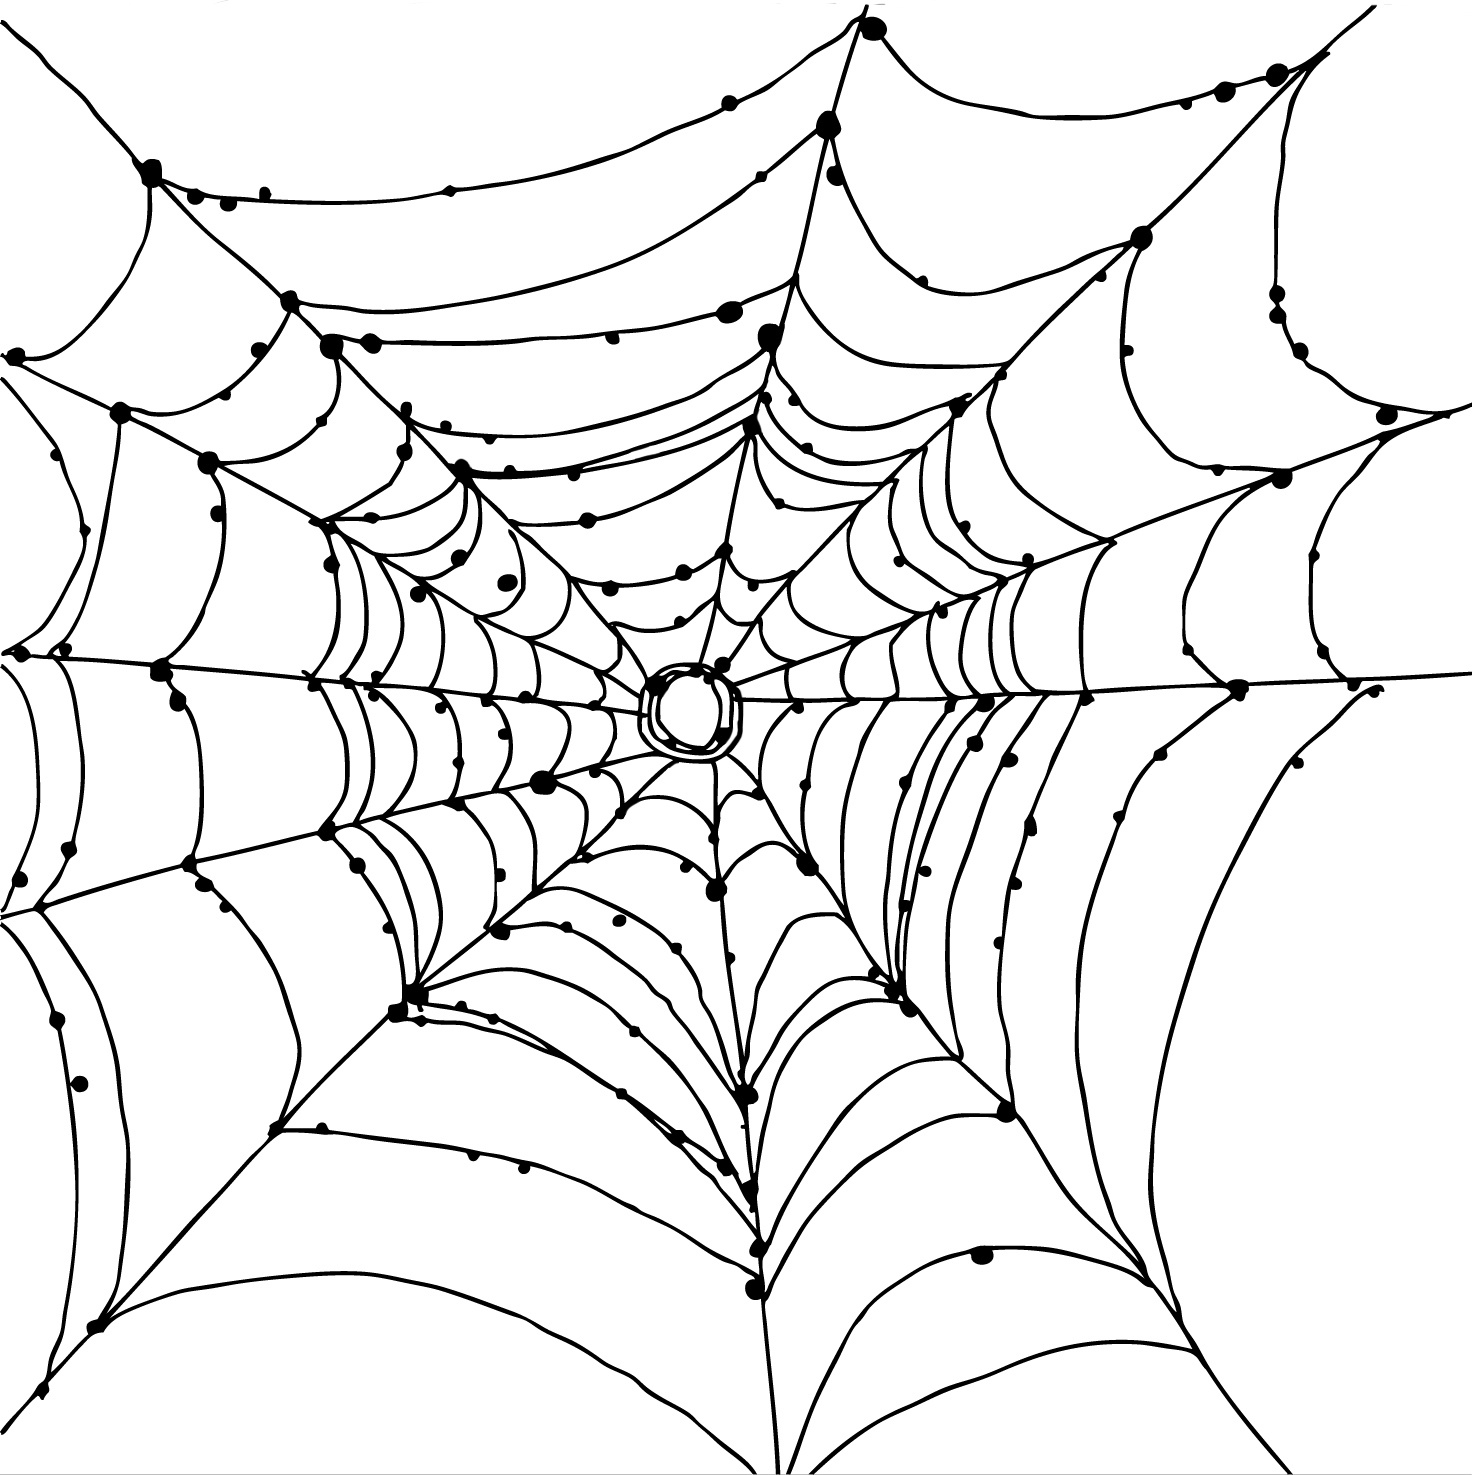 Free Printable Spider Web Coloring Pages For Kids - Free Printable Spider Web